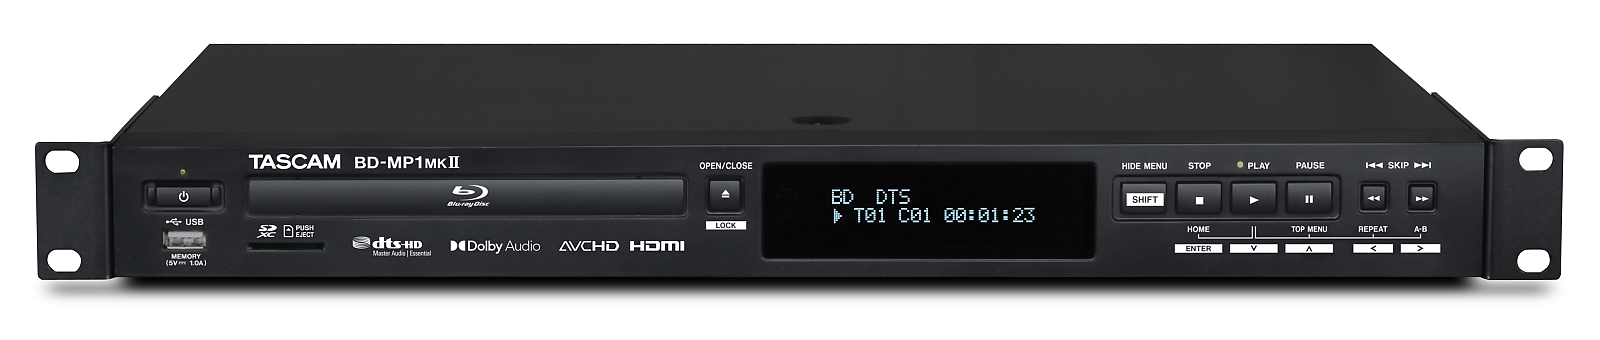 Professional Blu-Ray Player for Touring and Installation | Tascam BD-MP1MKII